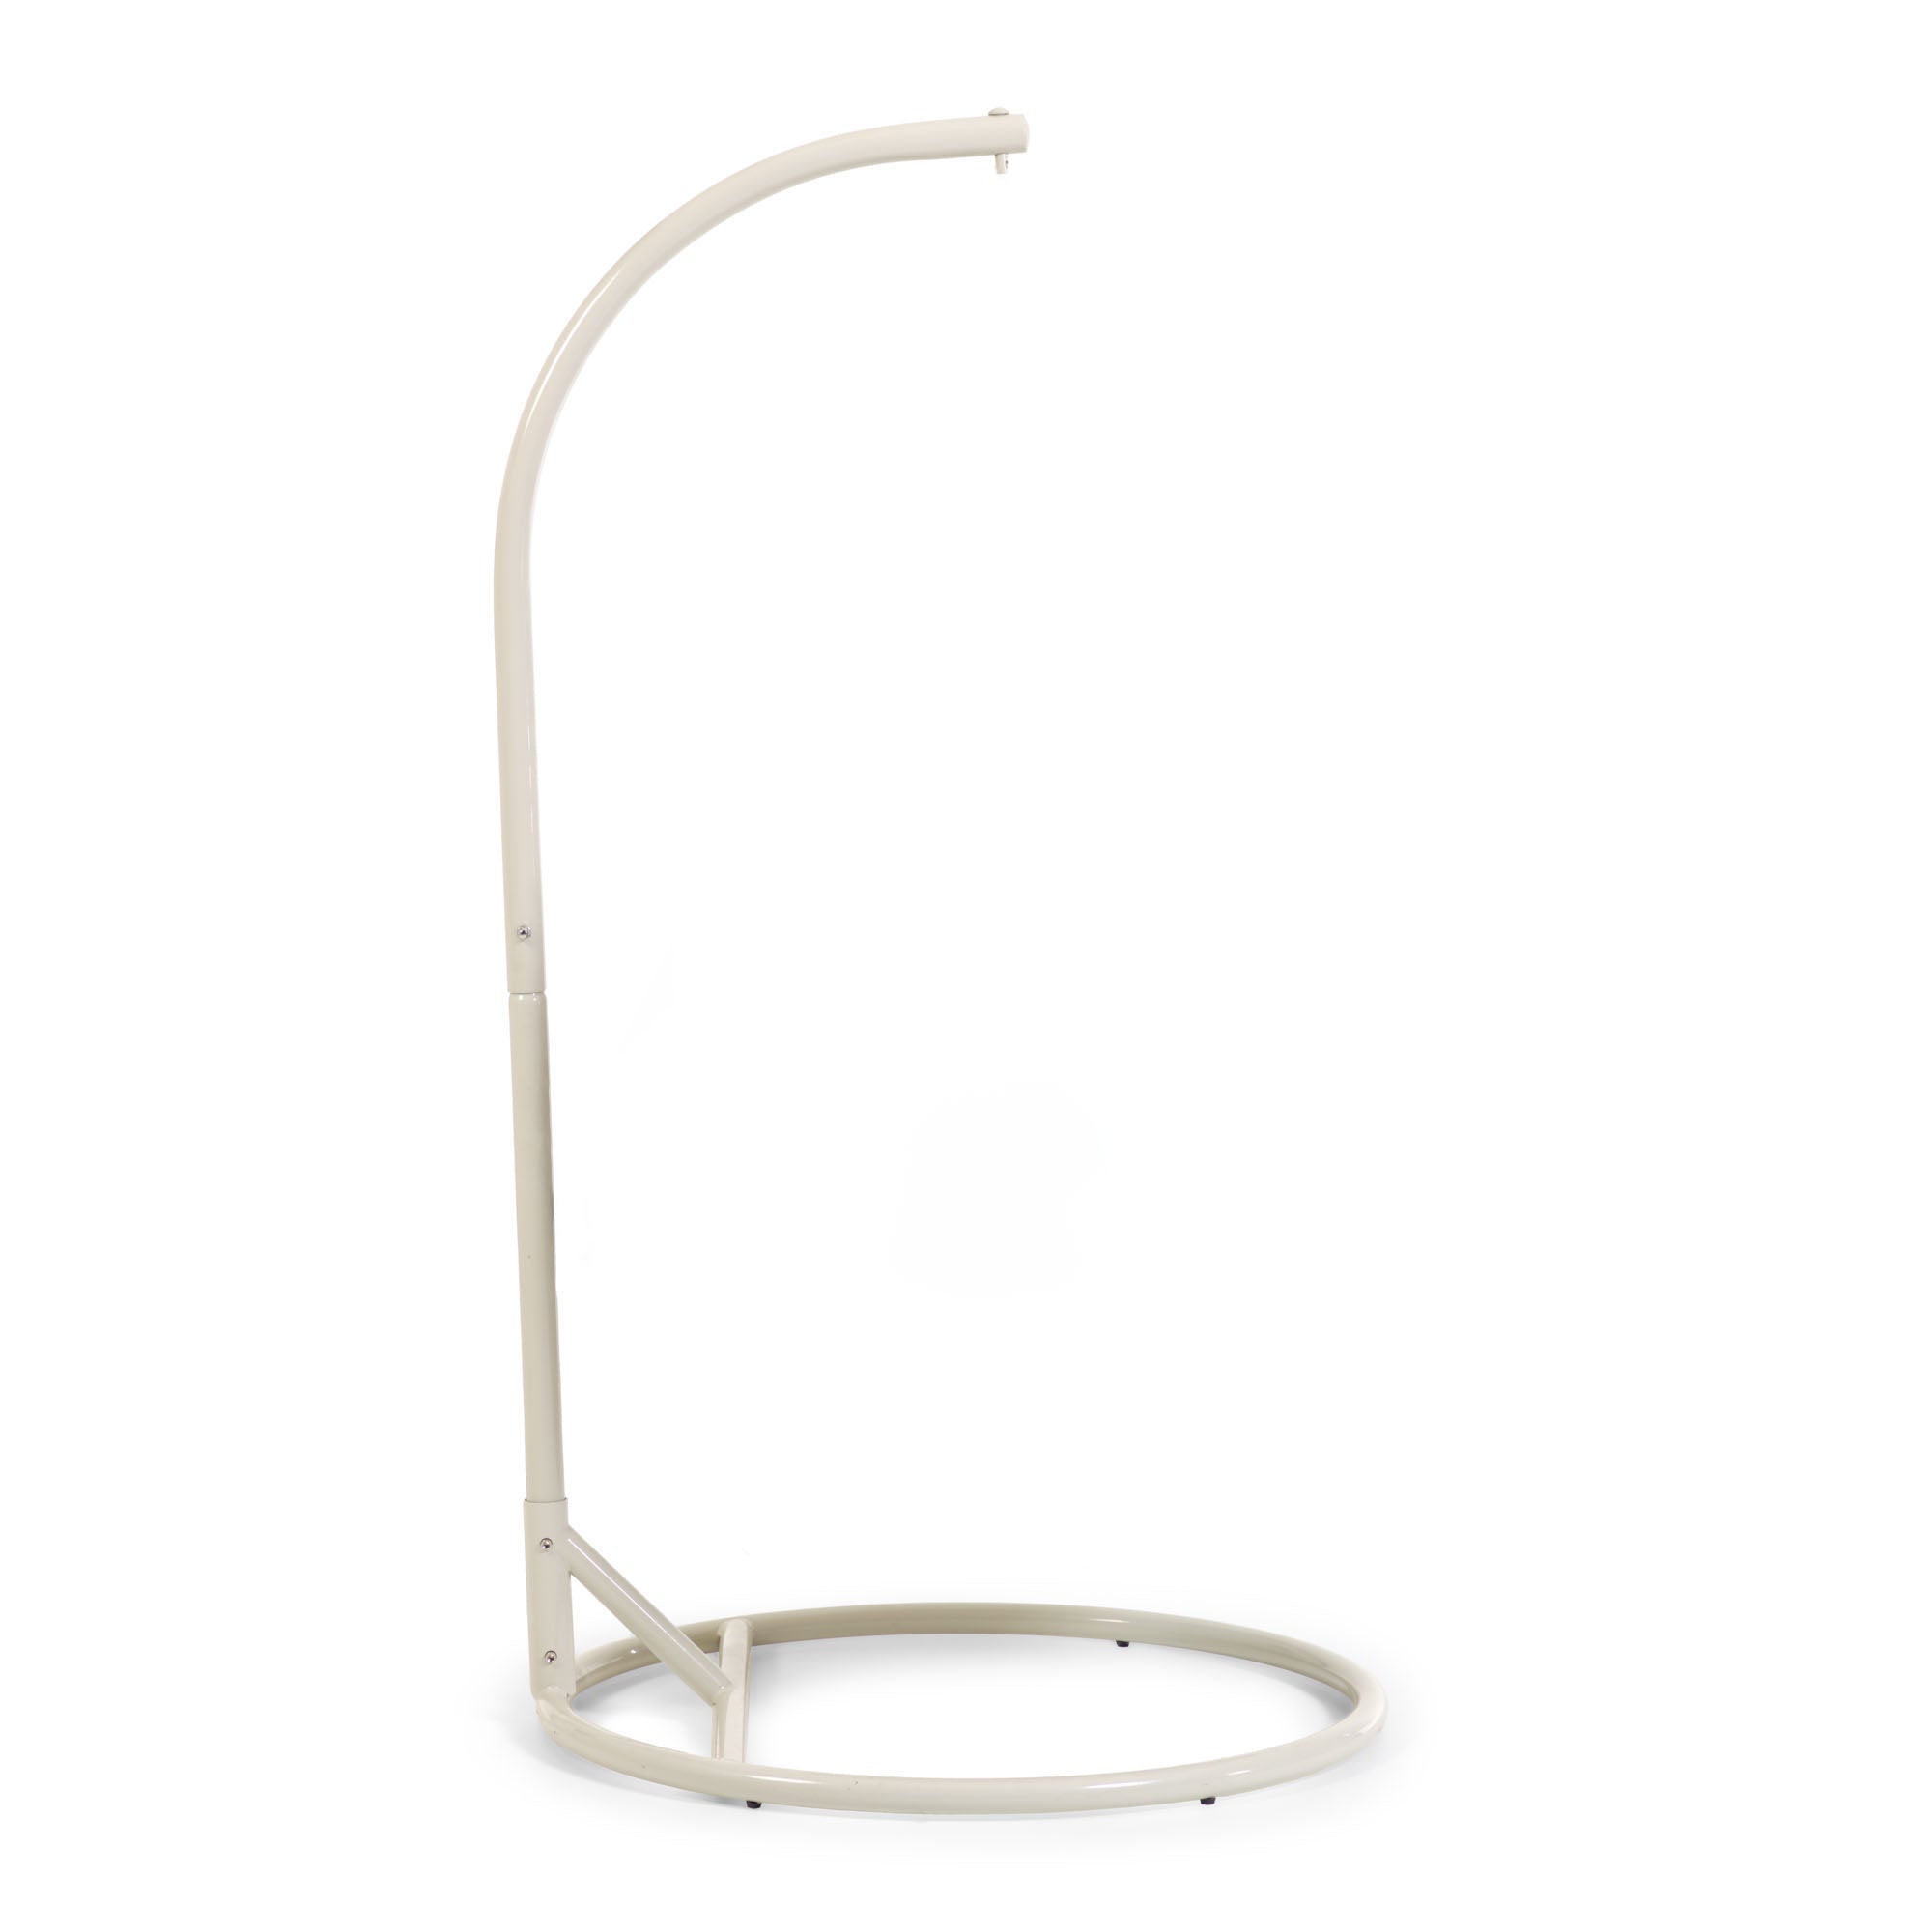 Dalias light grey steel structure for hanging chair